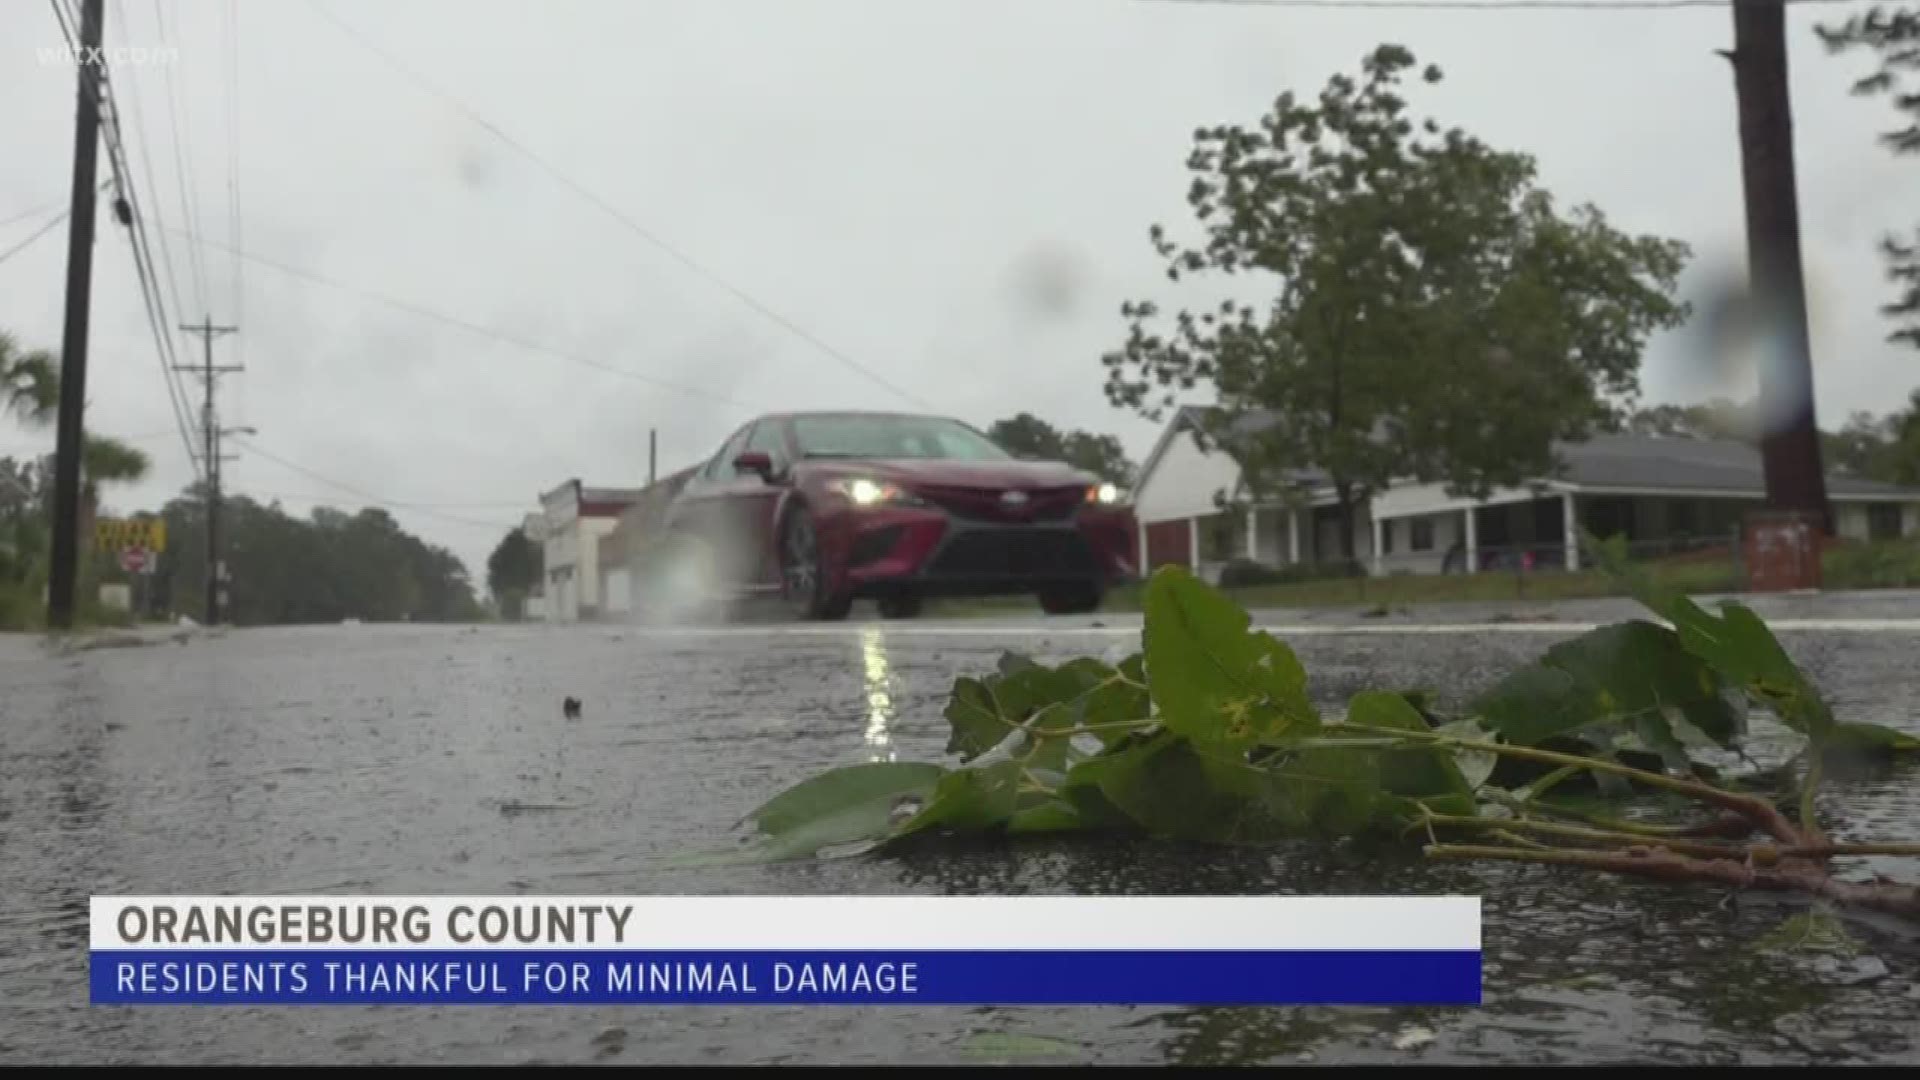 Those who live in Orangeburg county were relieved that Hurricane Dorian was just some wind and rain.